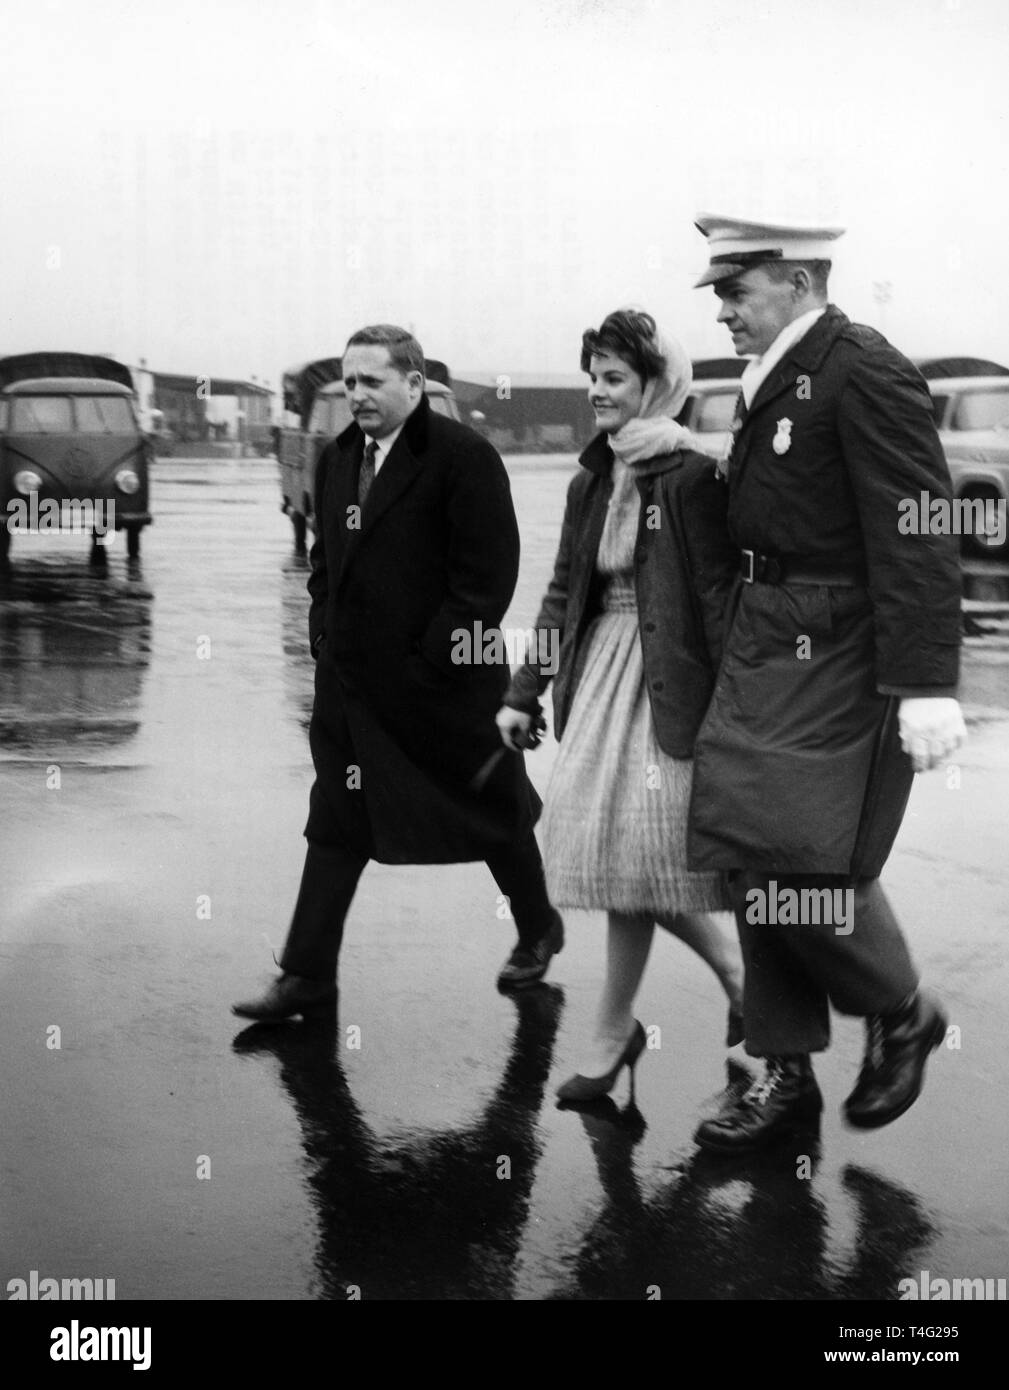 The 16-year-old Priscilla Beaulieu is accompanied by a policeman on the military airbase in Frankfurt on 02 March 1960. The girlfriend and later wife of the American Rock'n Roll singer Elvis Presley had crossed the cordon of police to take leave of Elvis before his flight back to the States. Presley was deployed as a soldier in Hesse and got to know the stepdaughter of a Canadian air force officer in Bad Nauheim in 1959. They married in Las Vegas in 1967. | usage worldwide Stock Photo